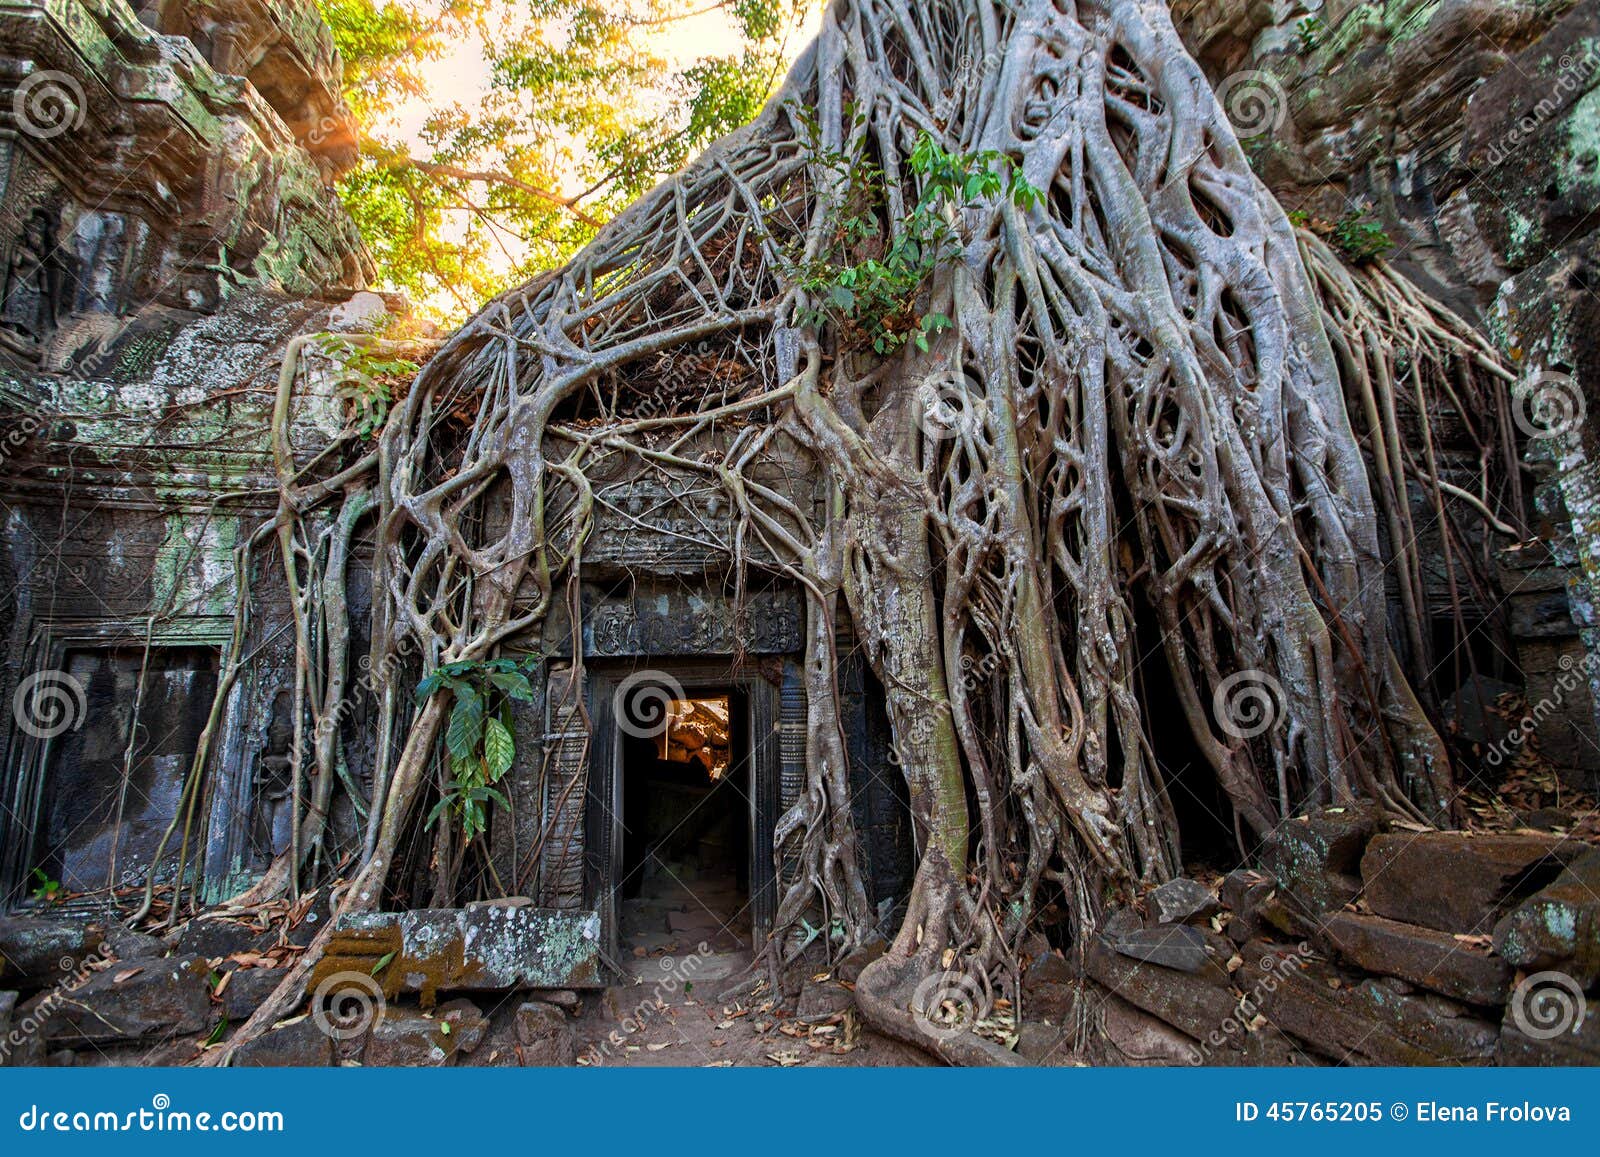 the ancient ruins and tree roots,of a historic khmer temple in